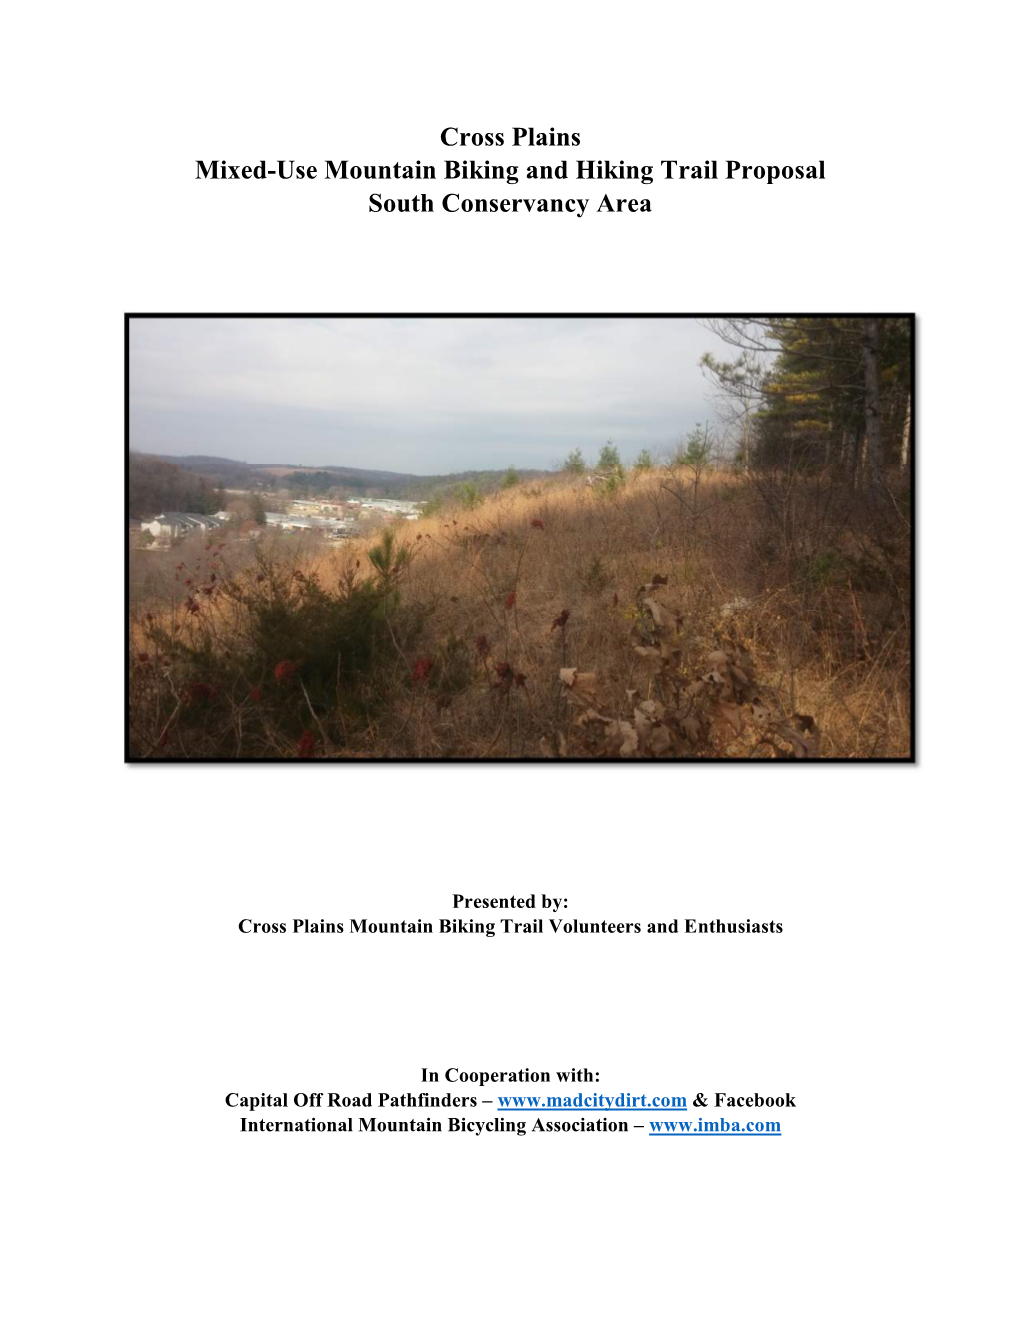 Cross Plains Mixed-Use Mountain Biking and Hiking Trail Proposal South Conservancy Area